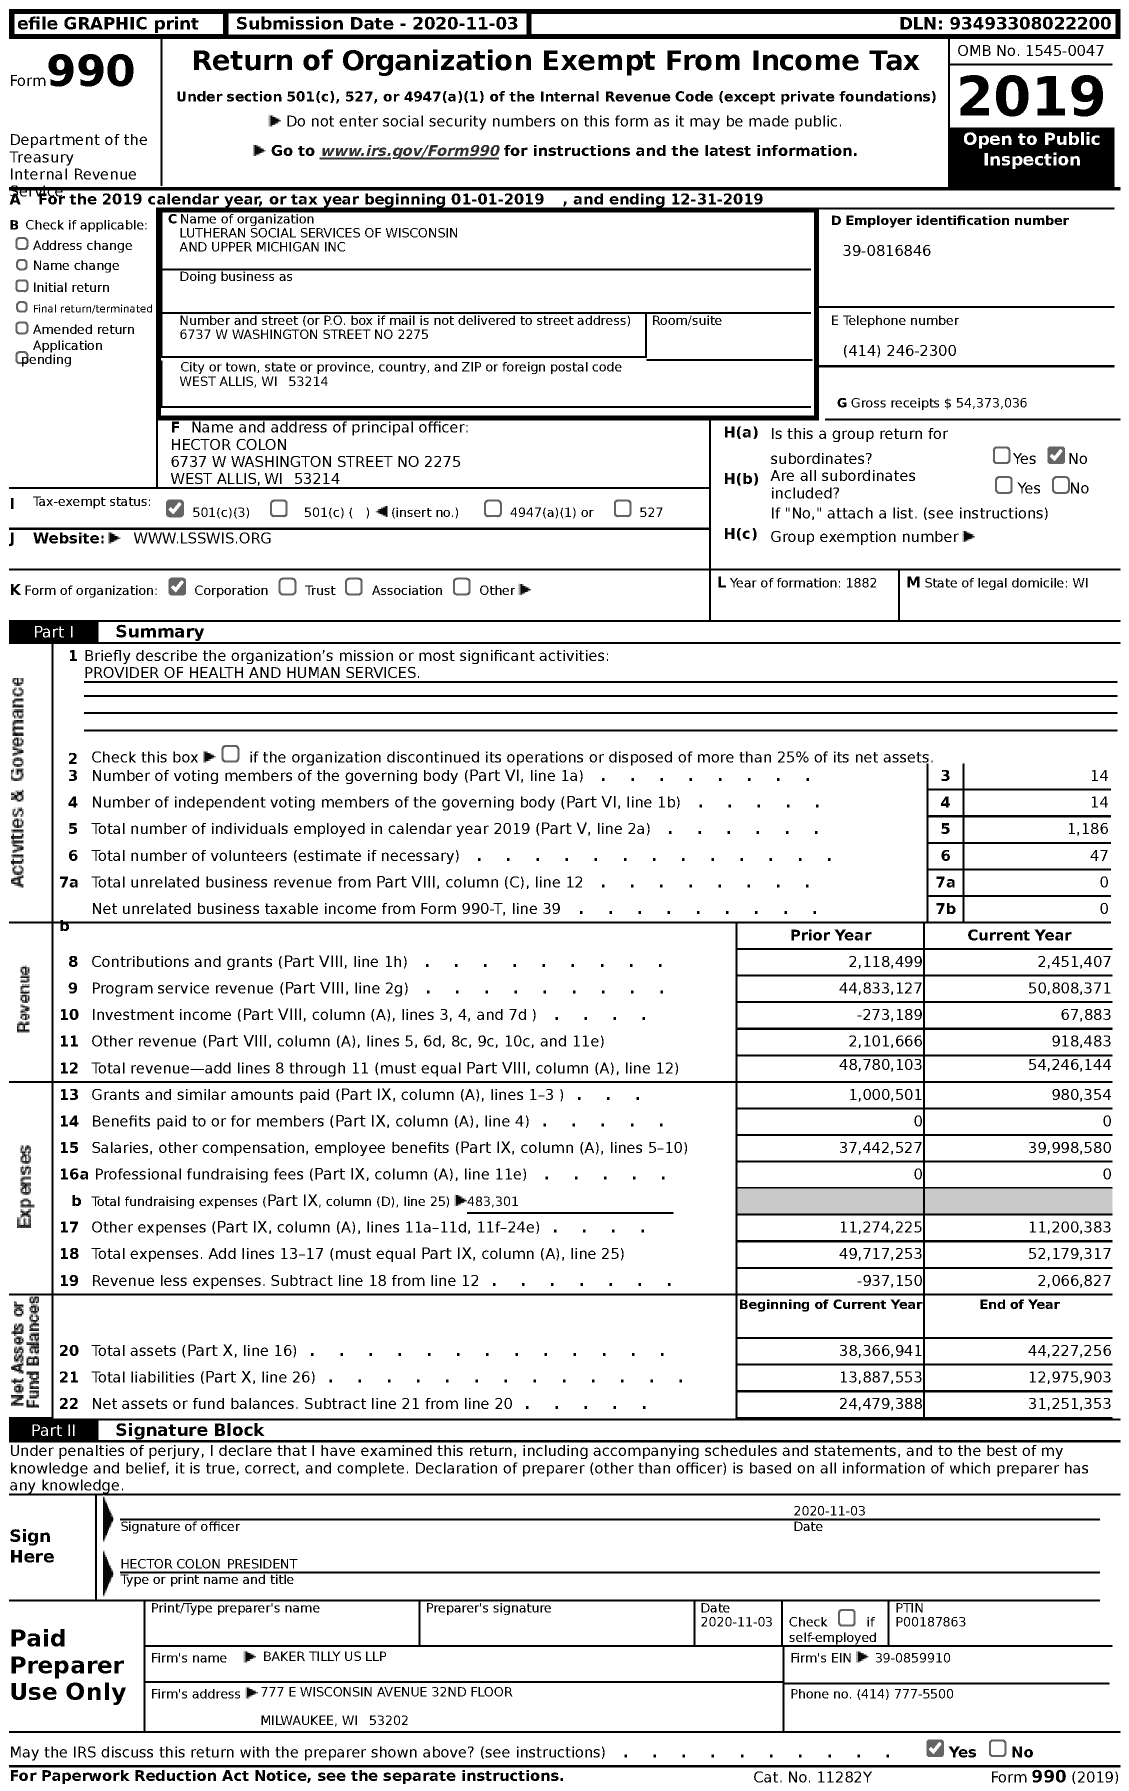 Image of first page of 2019 Form 990 for Lutheran Social Services of Wisconsin and Upper Michigan (LSS)